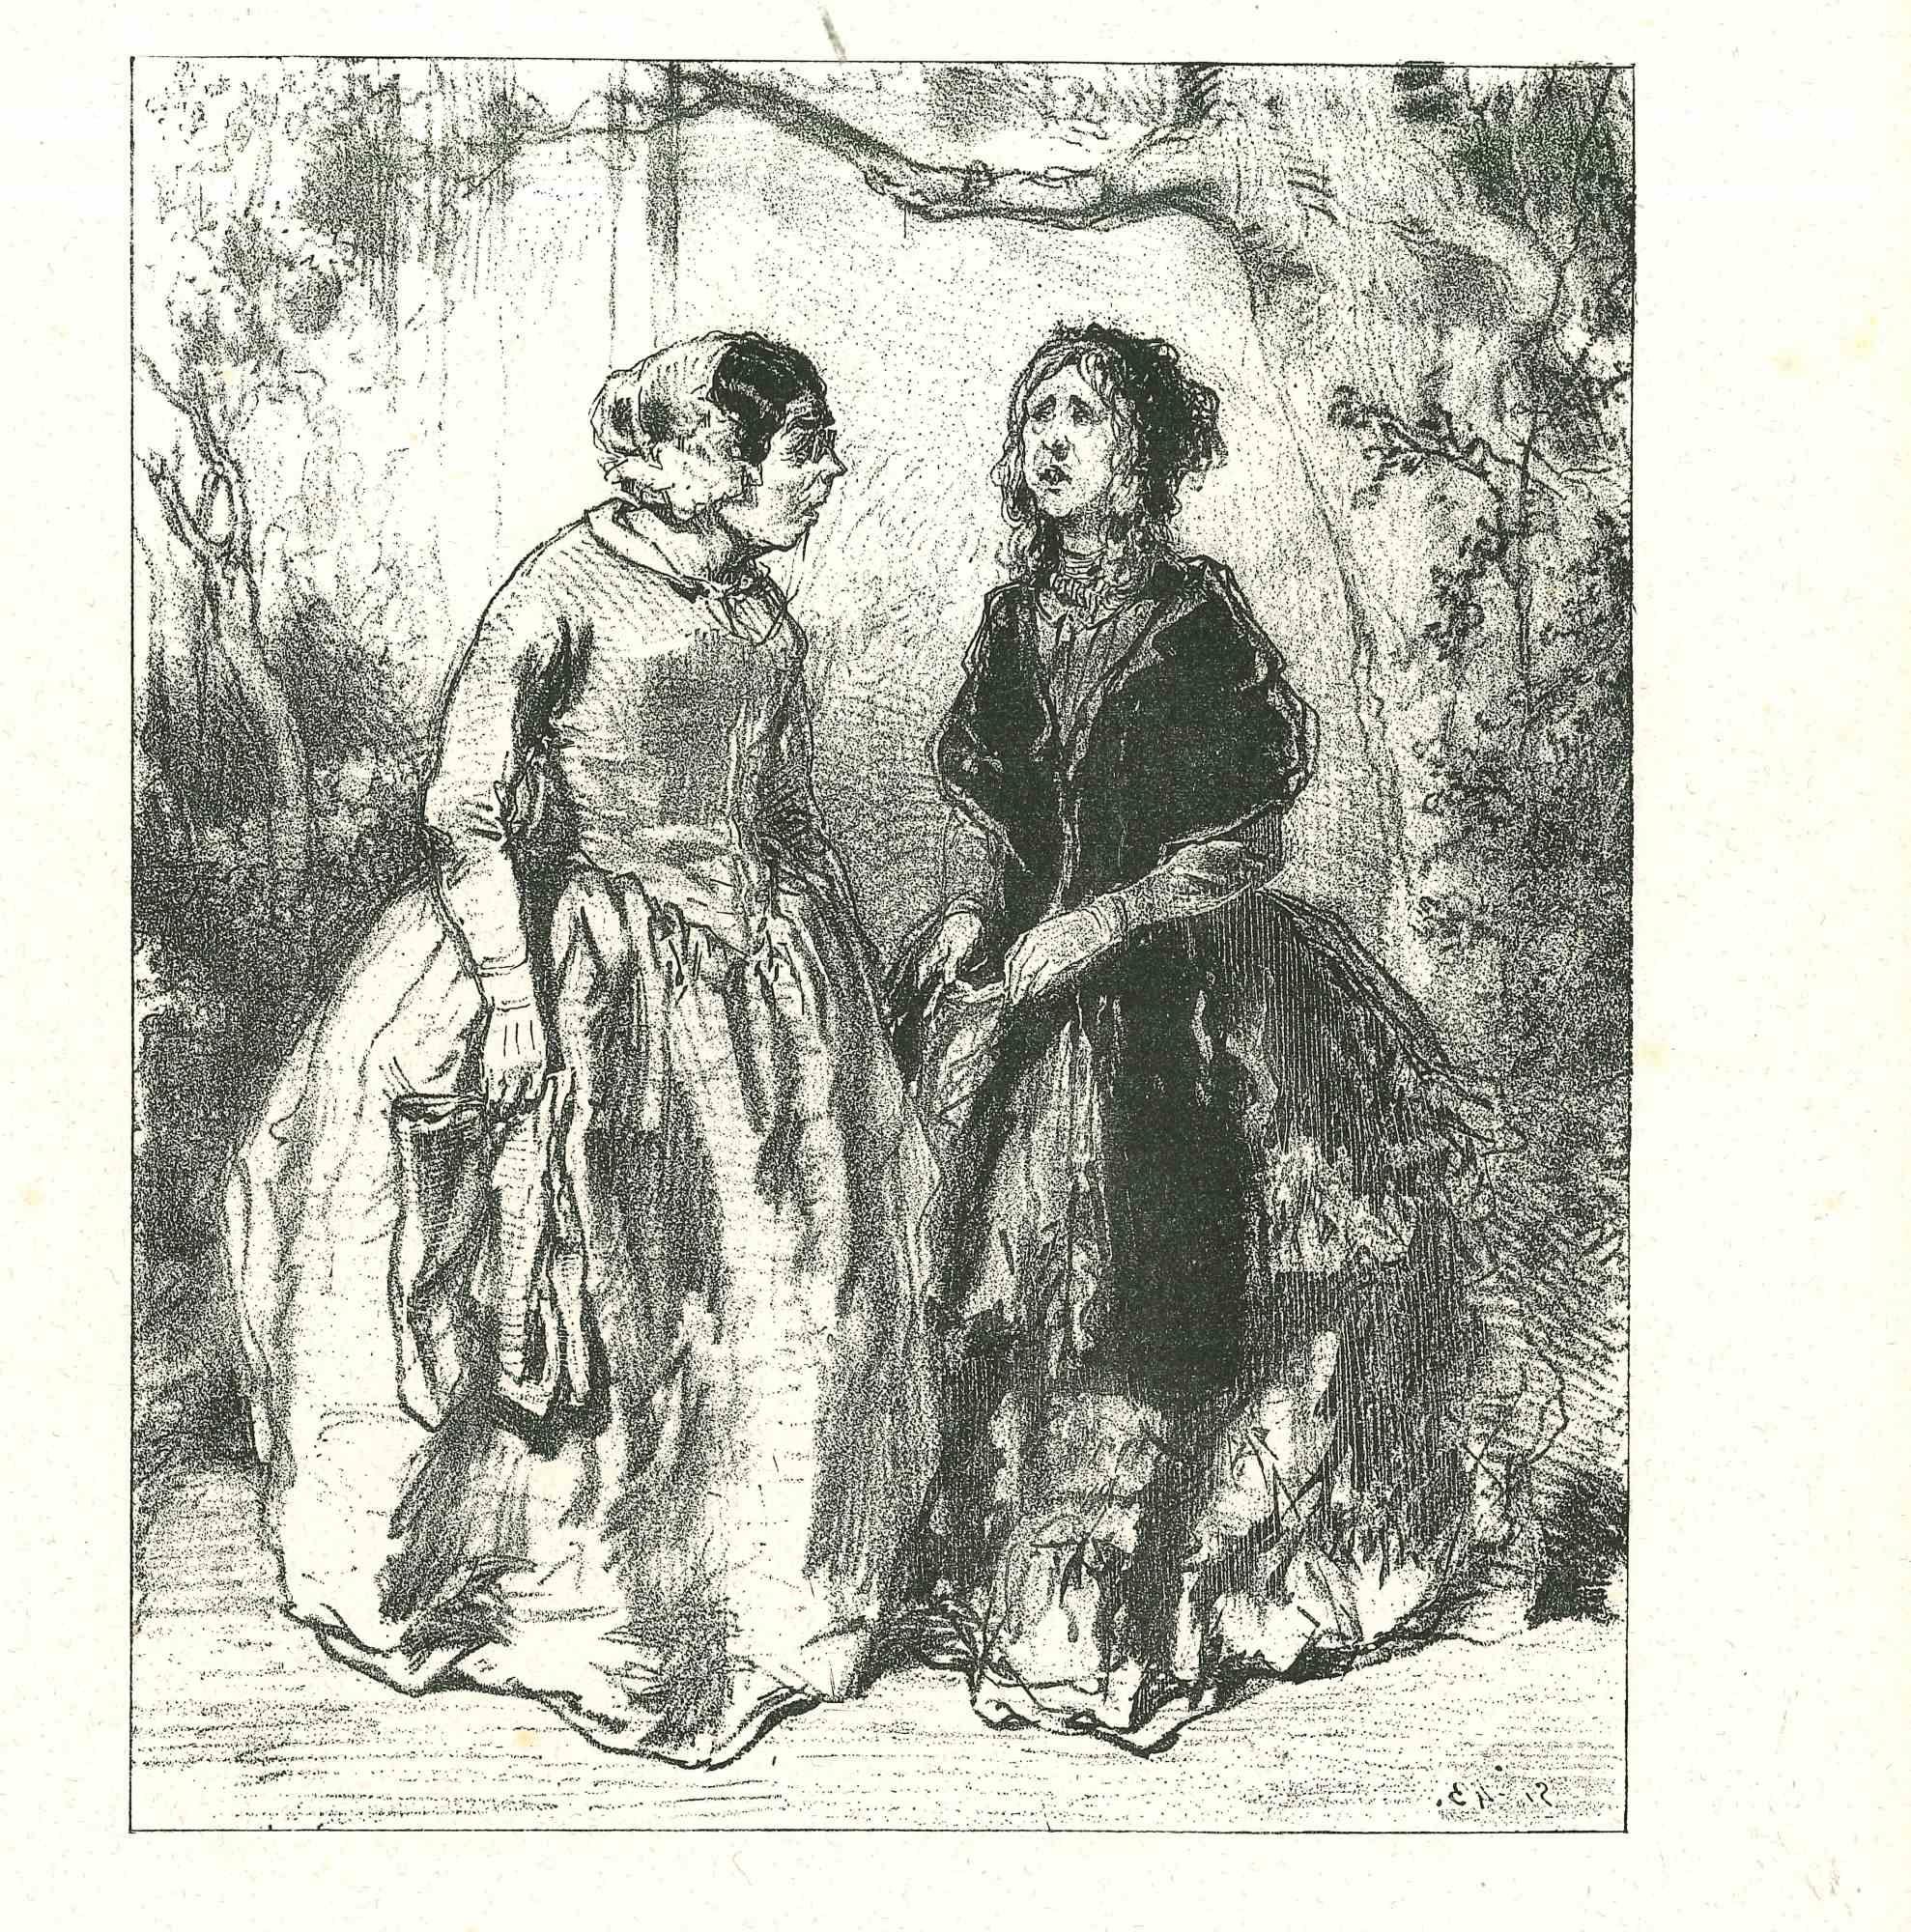 The women in the wood is an original lithograph artwork on ivory-colored paper, realized by the French draftsman Paul Gavarni (after) (alias Guillaume Sulpice Chevalier Gavarni, 1804-1866) in Paris, 1881, in the collection of Illustrations for "La